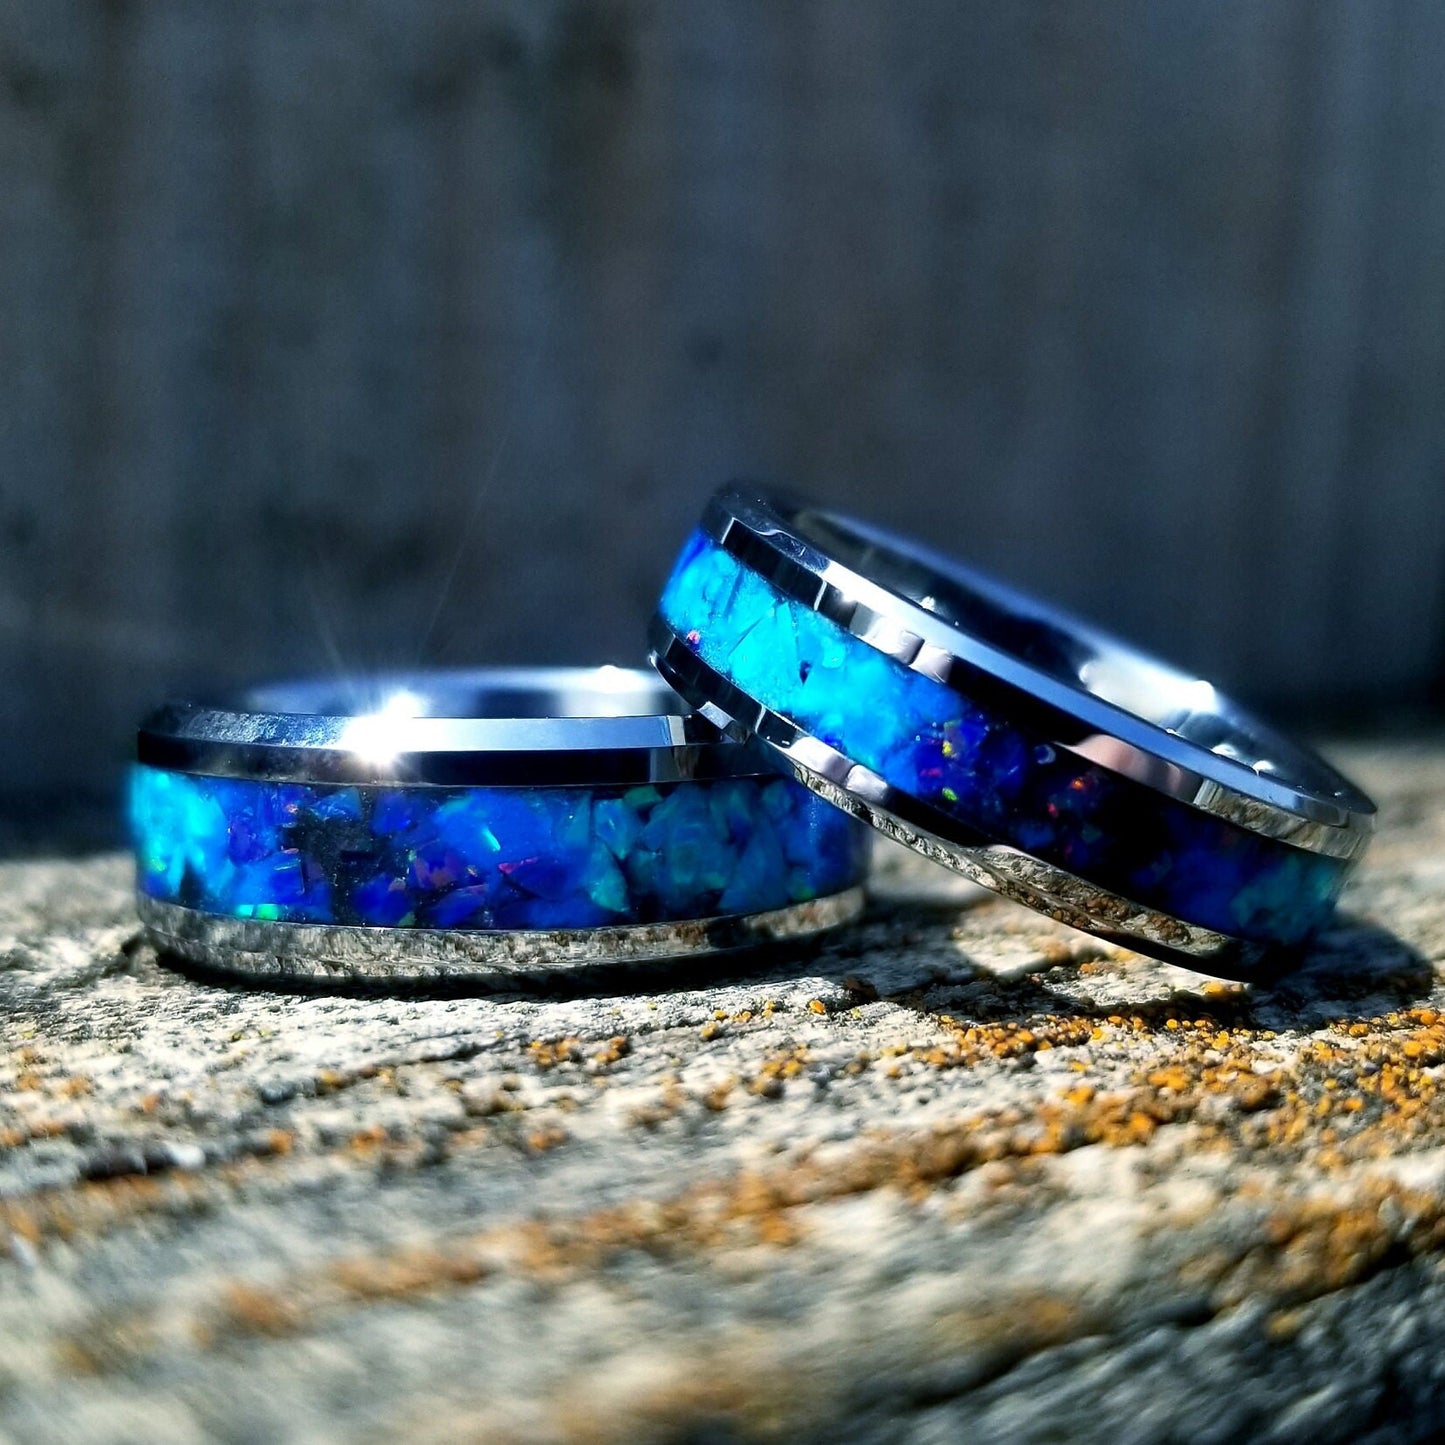 His and Hers wedding ring set. Galaxy fire opal ring. Tungsten glow ring set with turquoise opal and blue fire opal inlay. Sizes 5-13